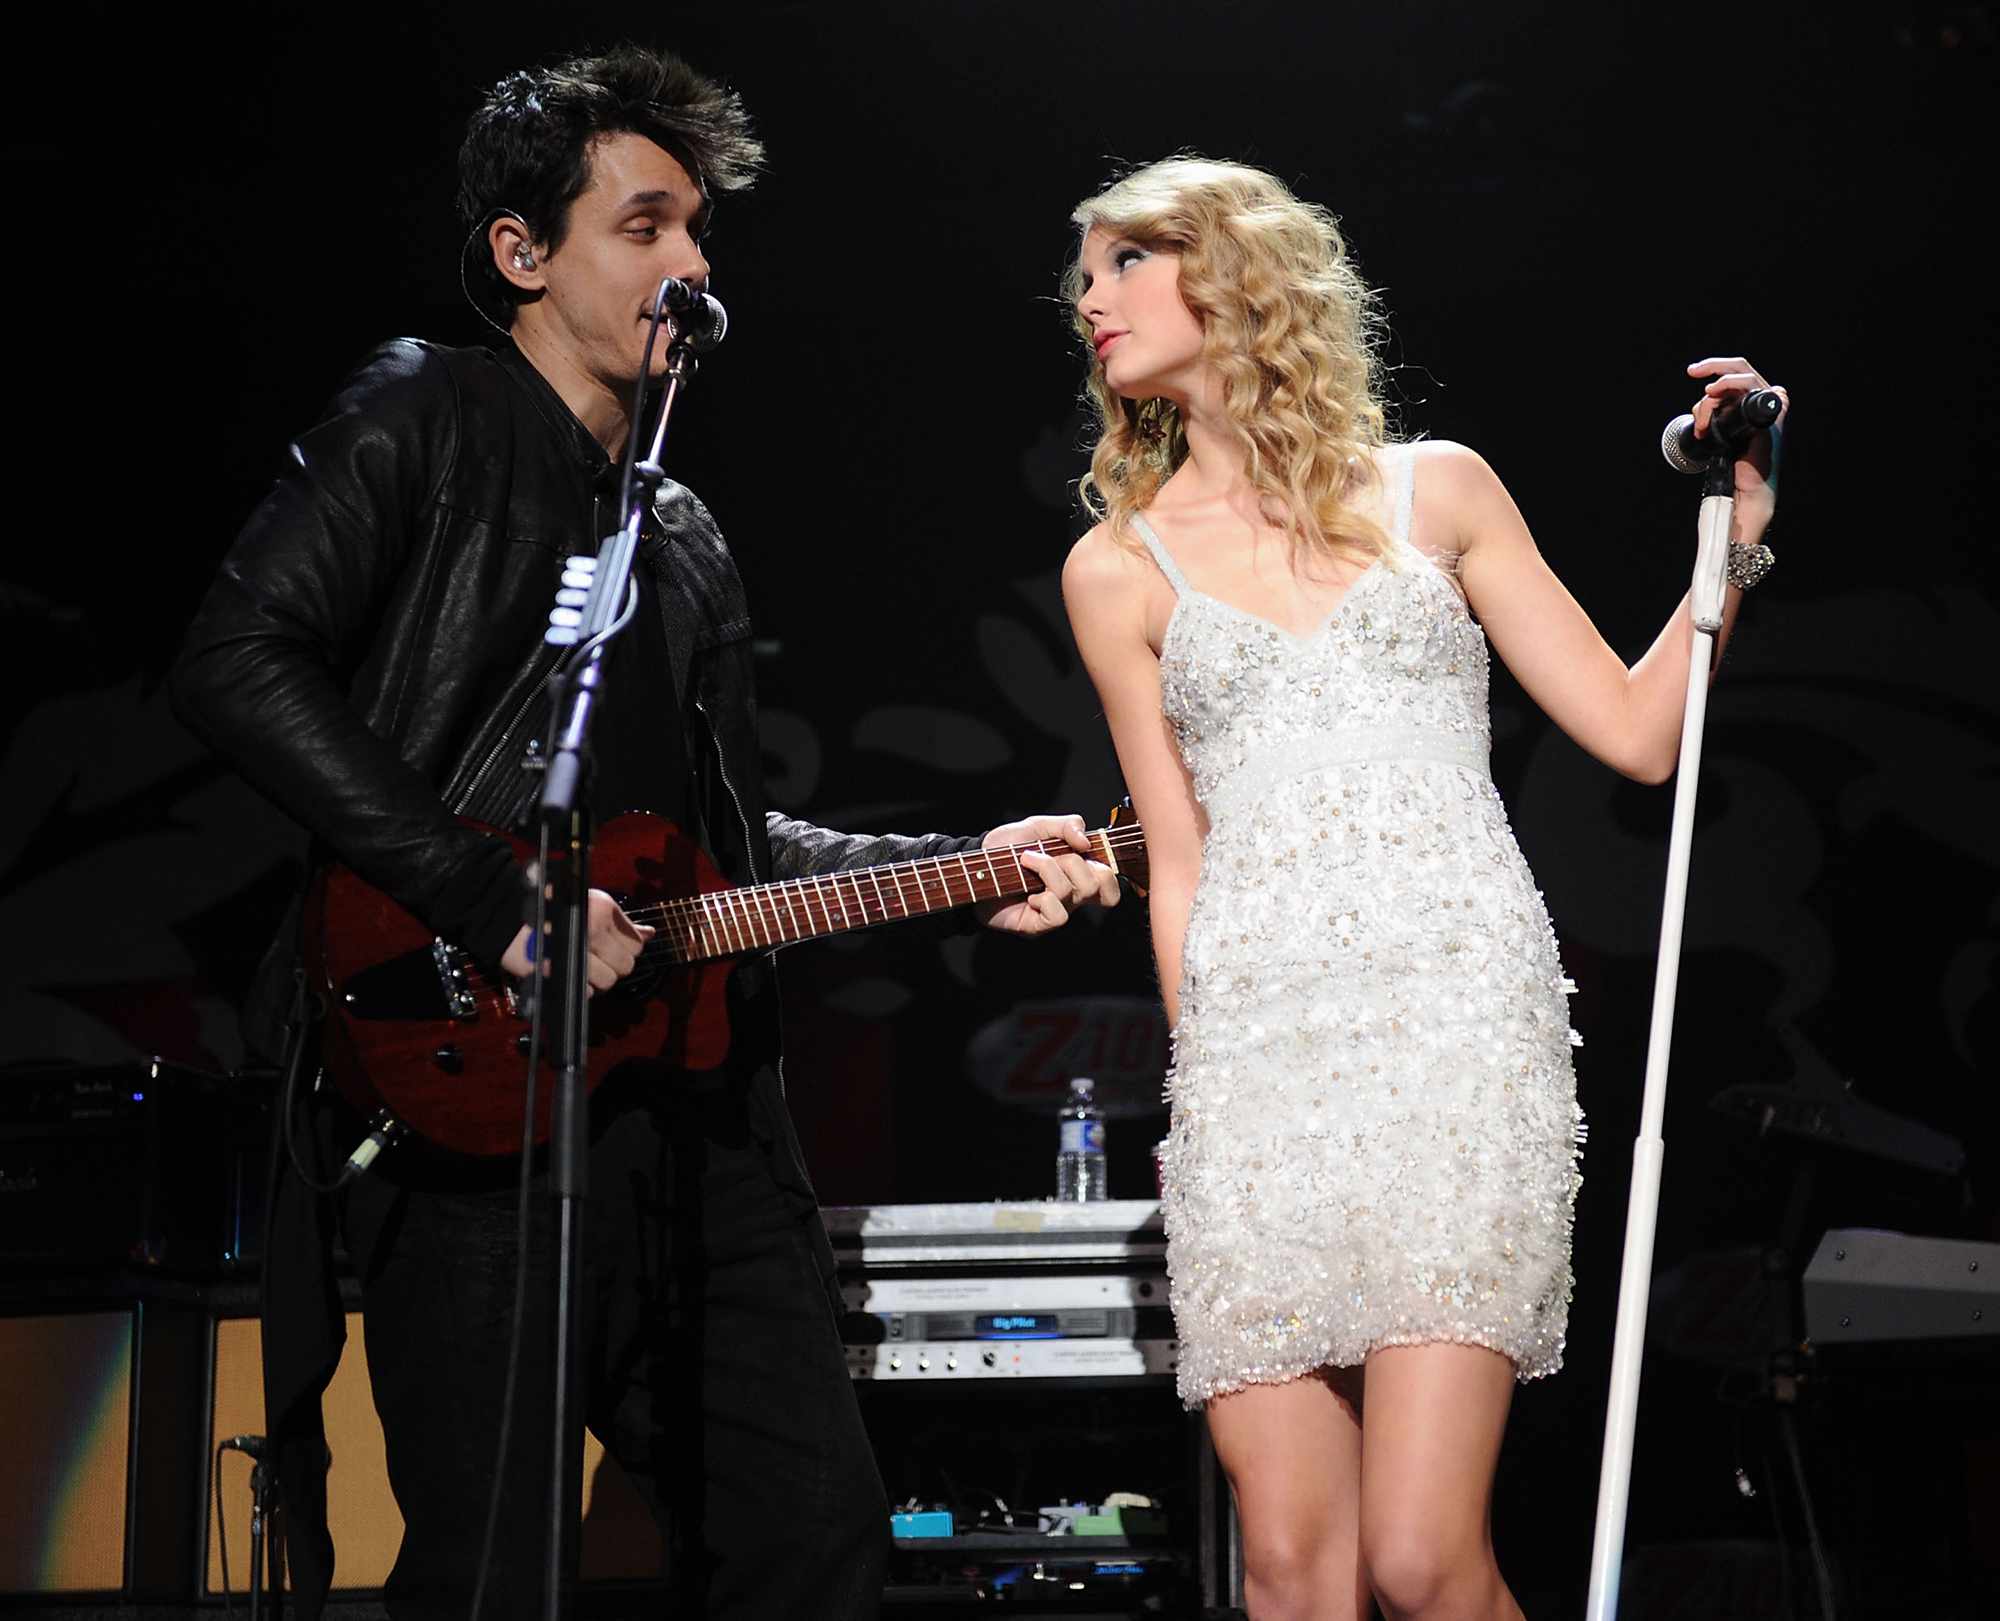 John Mayer and Taylor Swift perform onstage during Z100's Jingle Ball 2009 at Madison Square Garden on December 11, 2009 in New York City